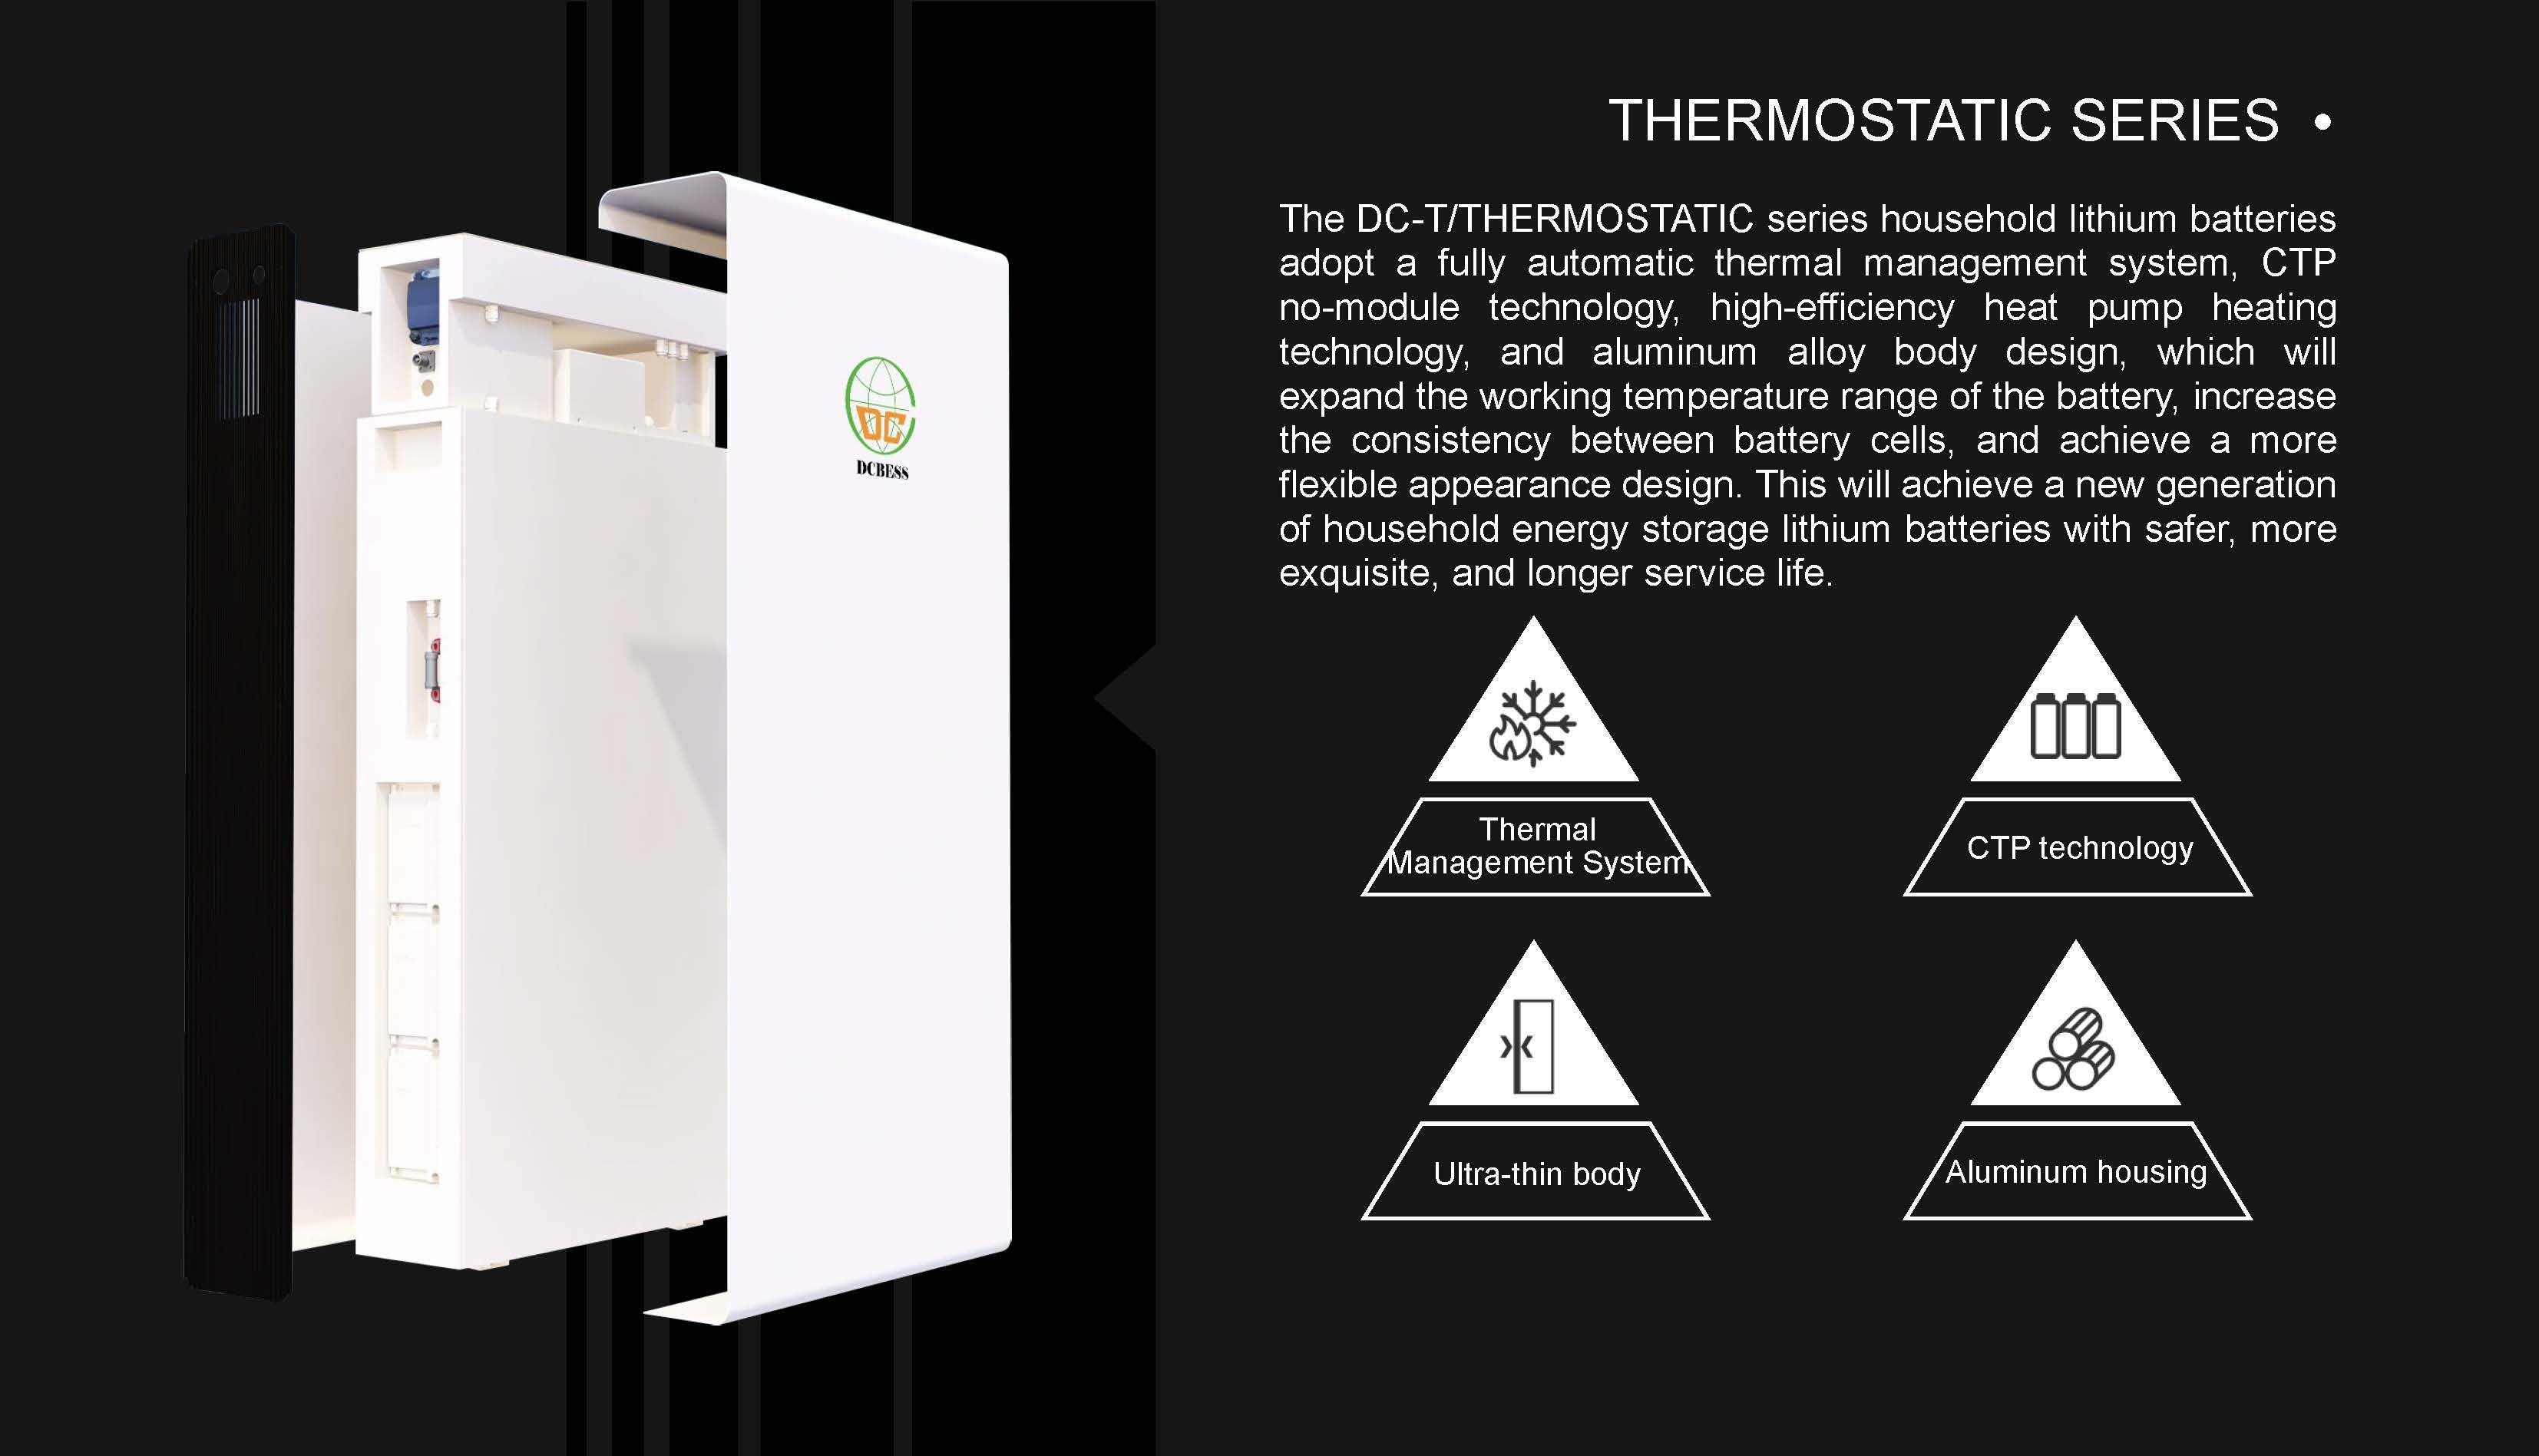 What is Thermostatic Household Energy Storage Lithium Battery System?